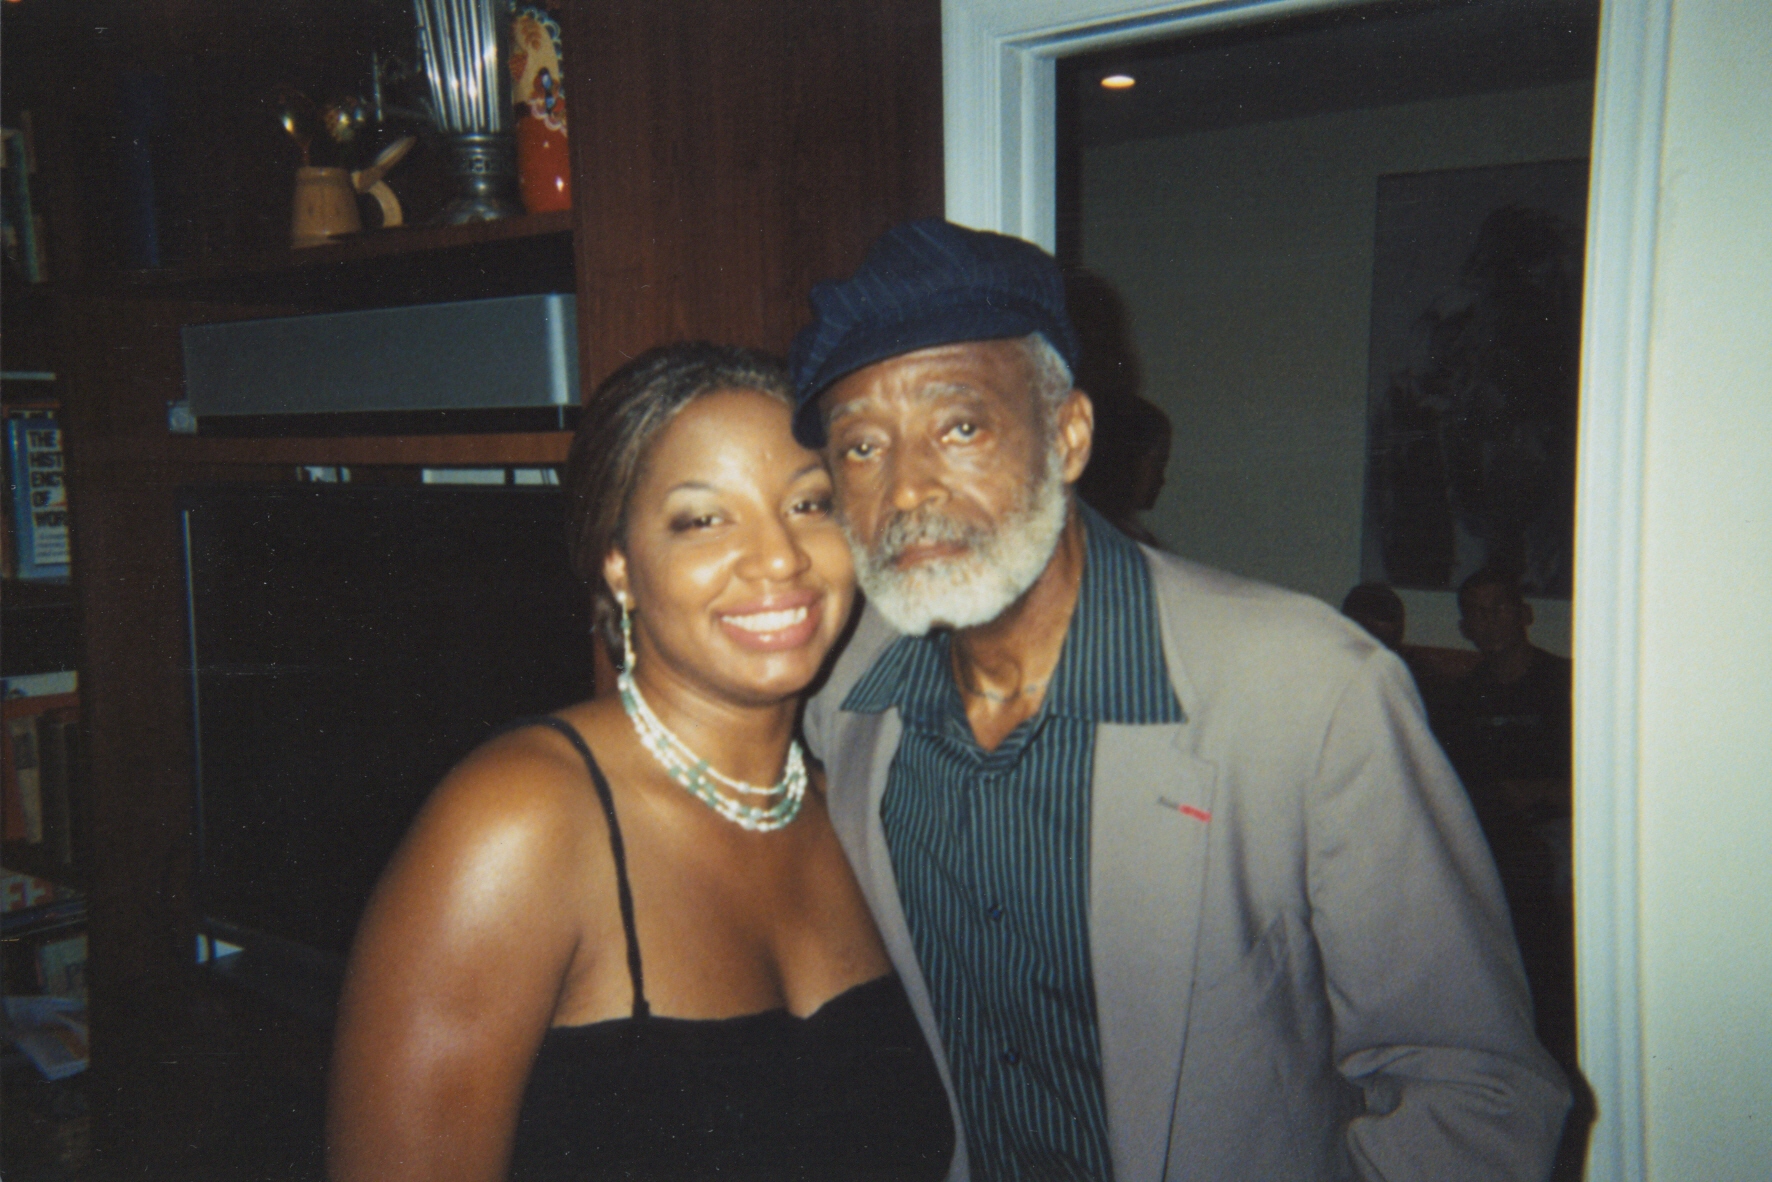 Nicole Denise Hodges takes a photo with legendary filmmaker Mr Melvin Van Peebles on set of a feature film. Melvin is known for Sweet Sweetback Baddasss Song, Posse, and Panther.